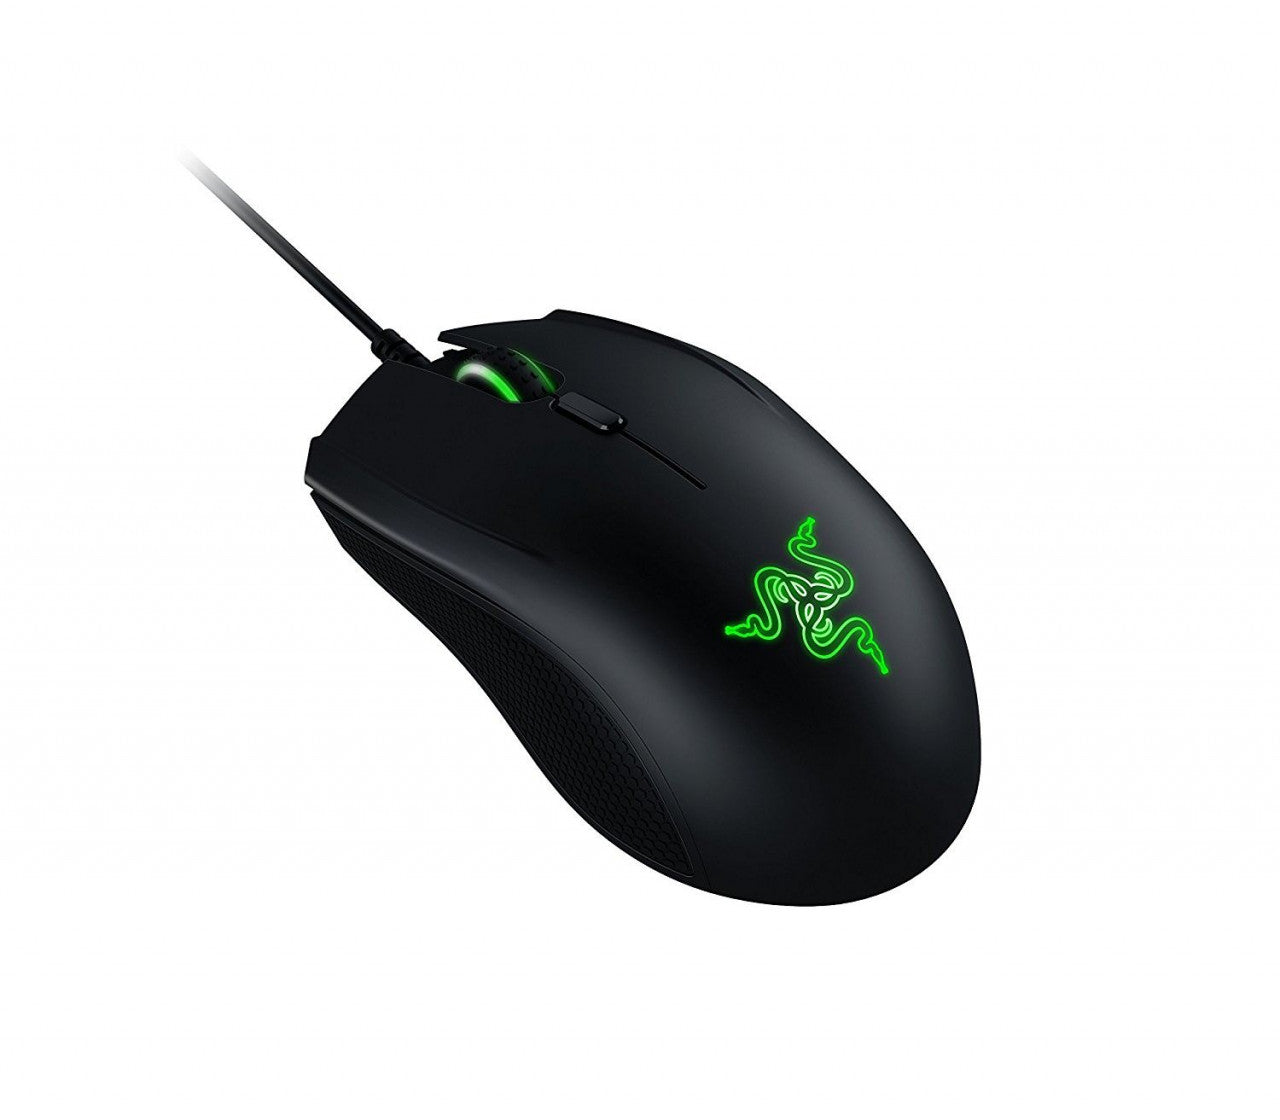 Razer Abyssus Mouse & Goliathus Speed Mouse Mat